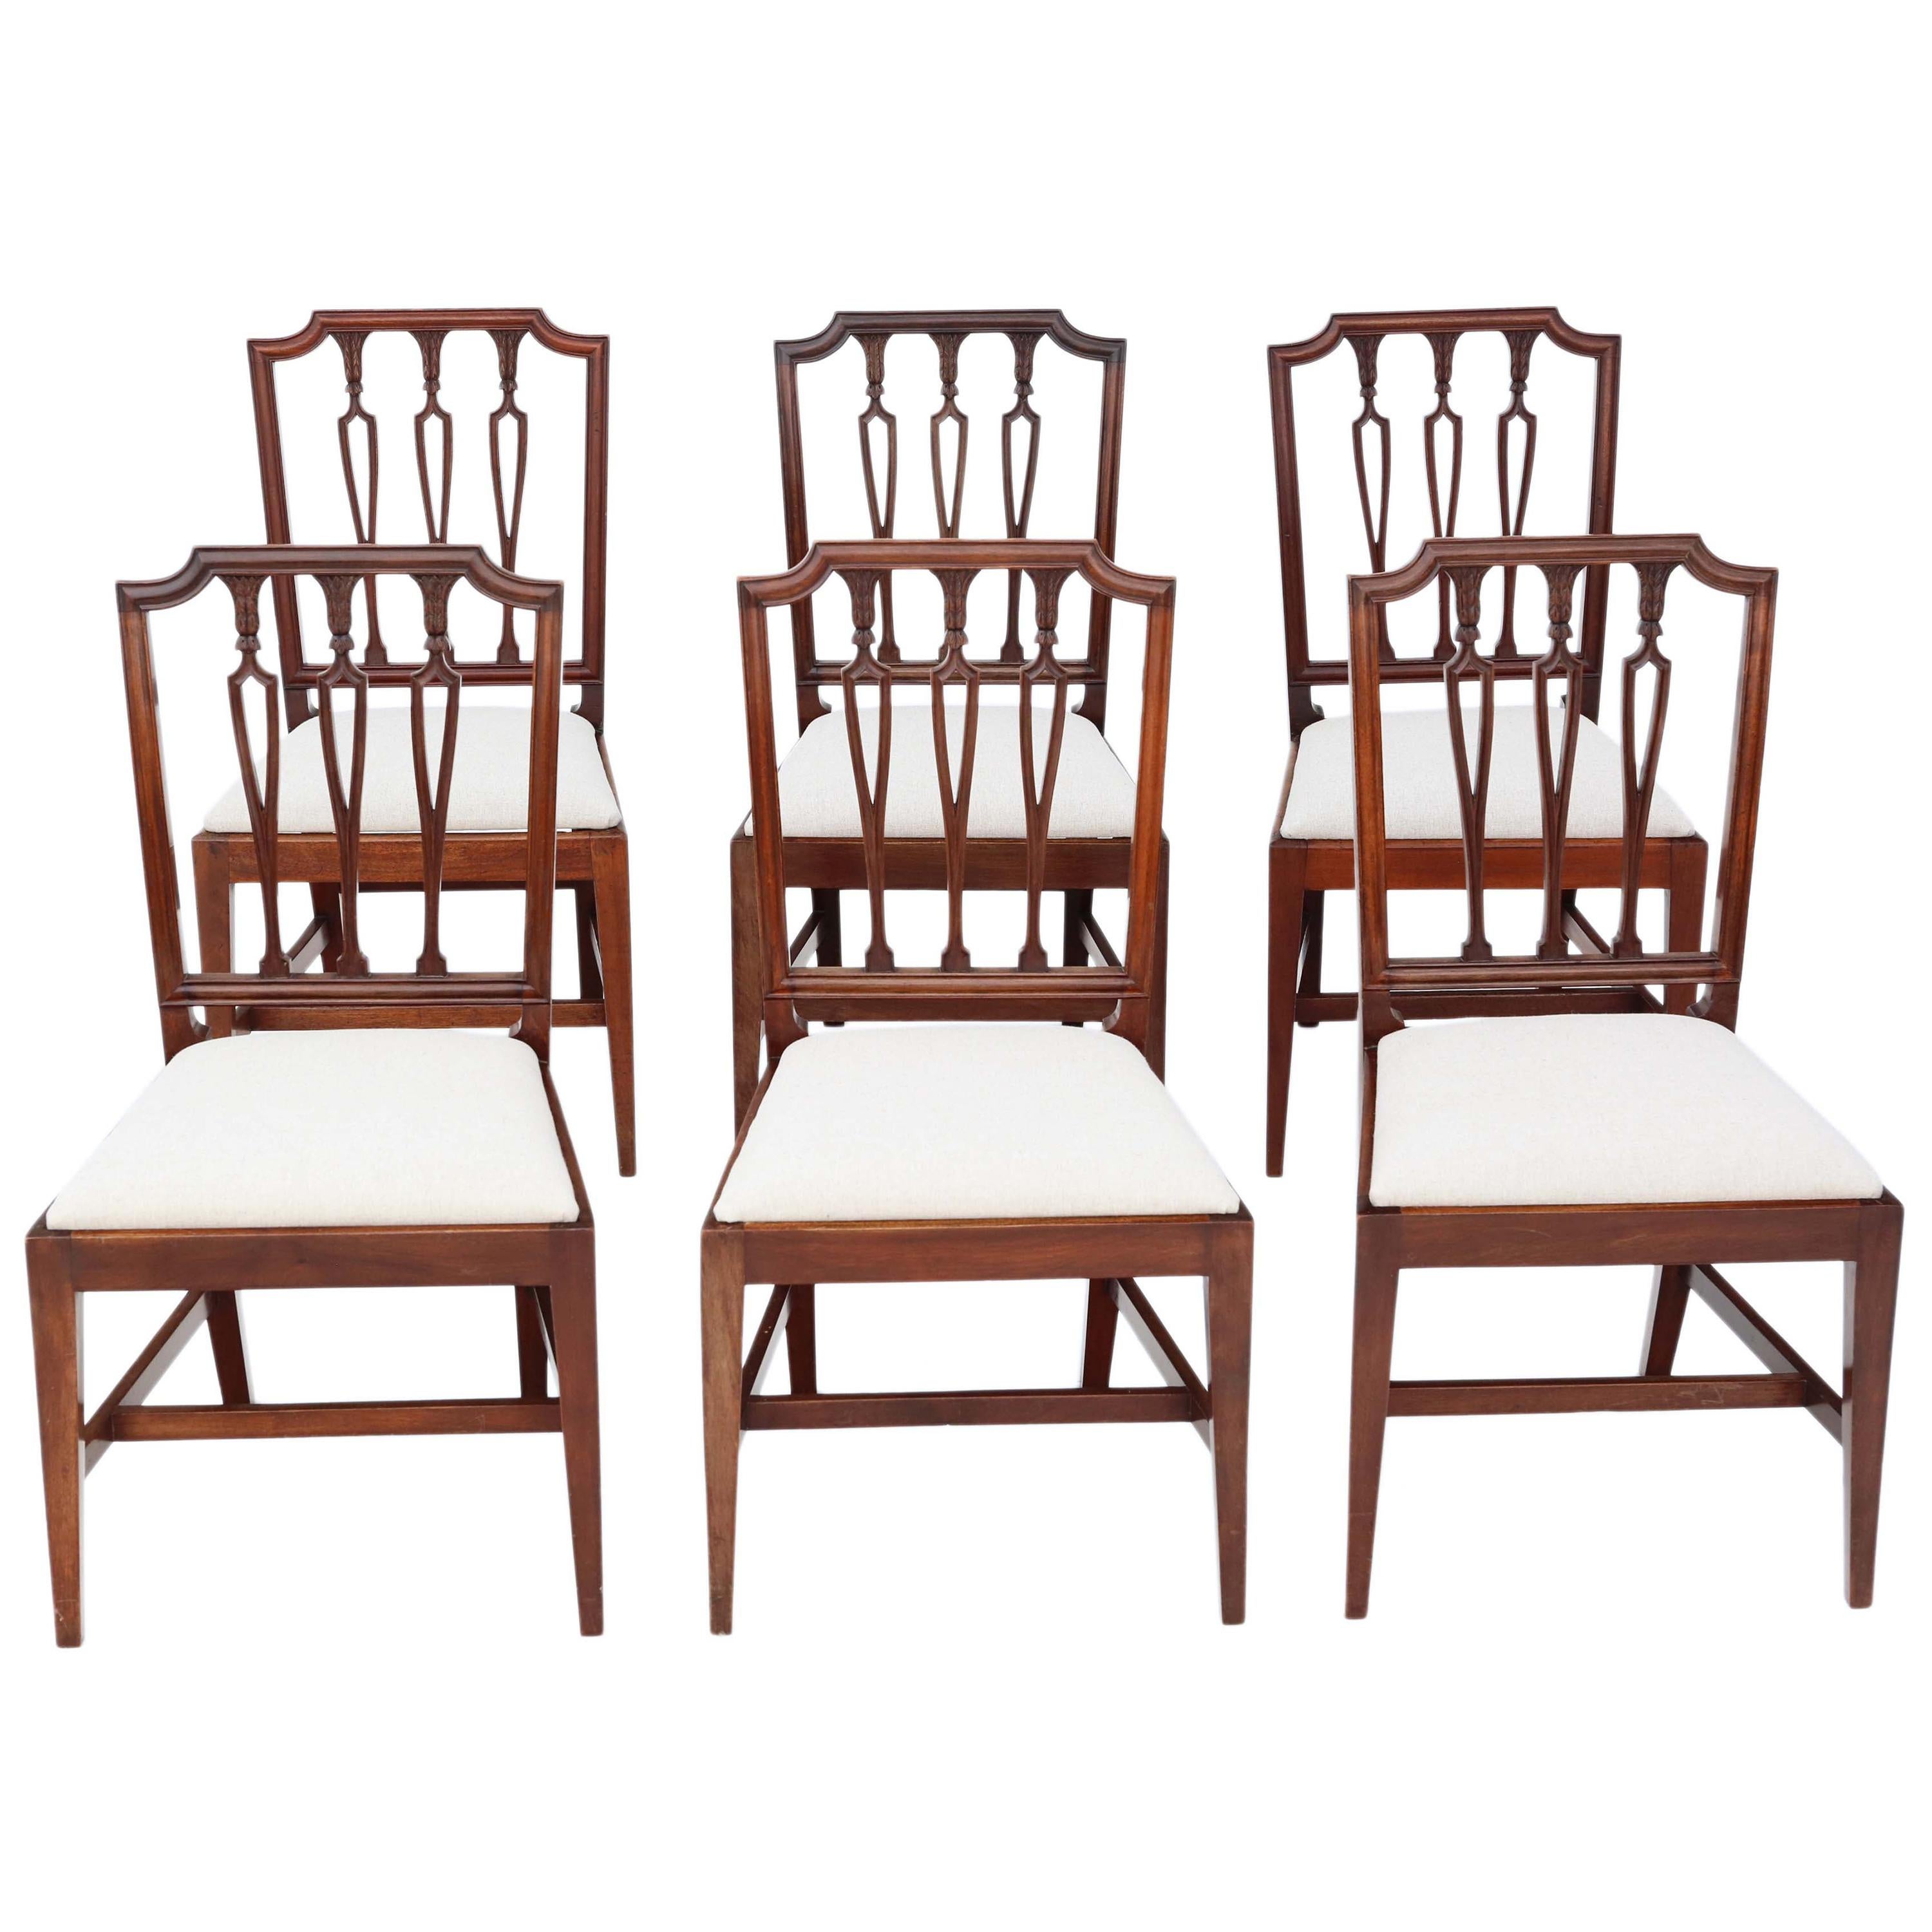 Antique Set of 6 19th Century Mahogany Dining Chairs